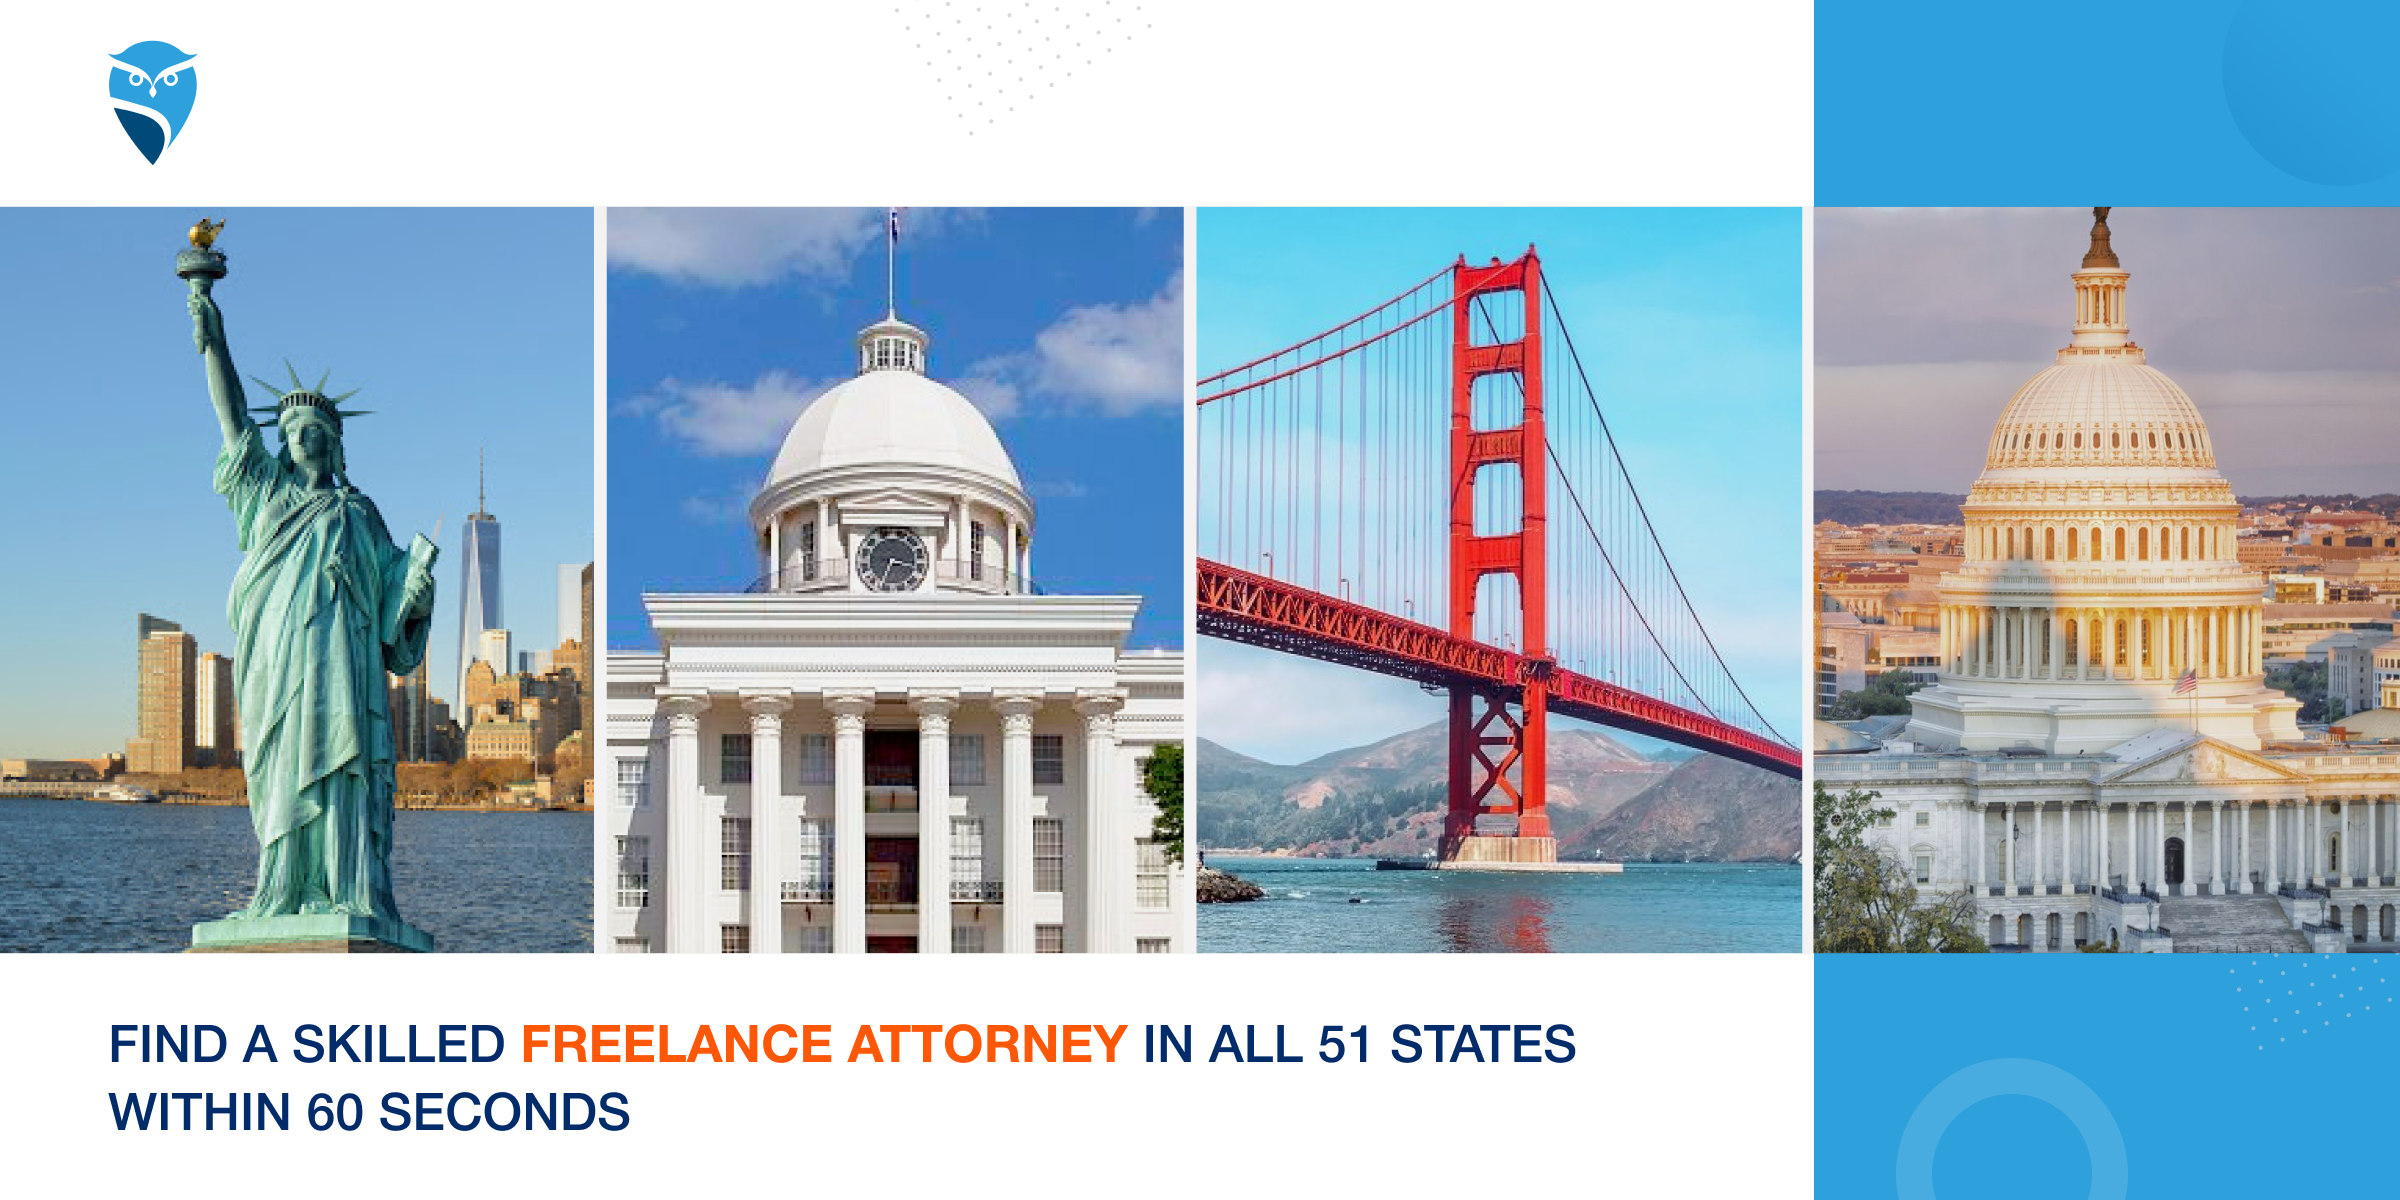 Find a Skilled Freelance Attorney in All 51 States within 60 Seconds